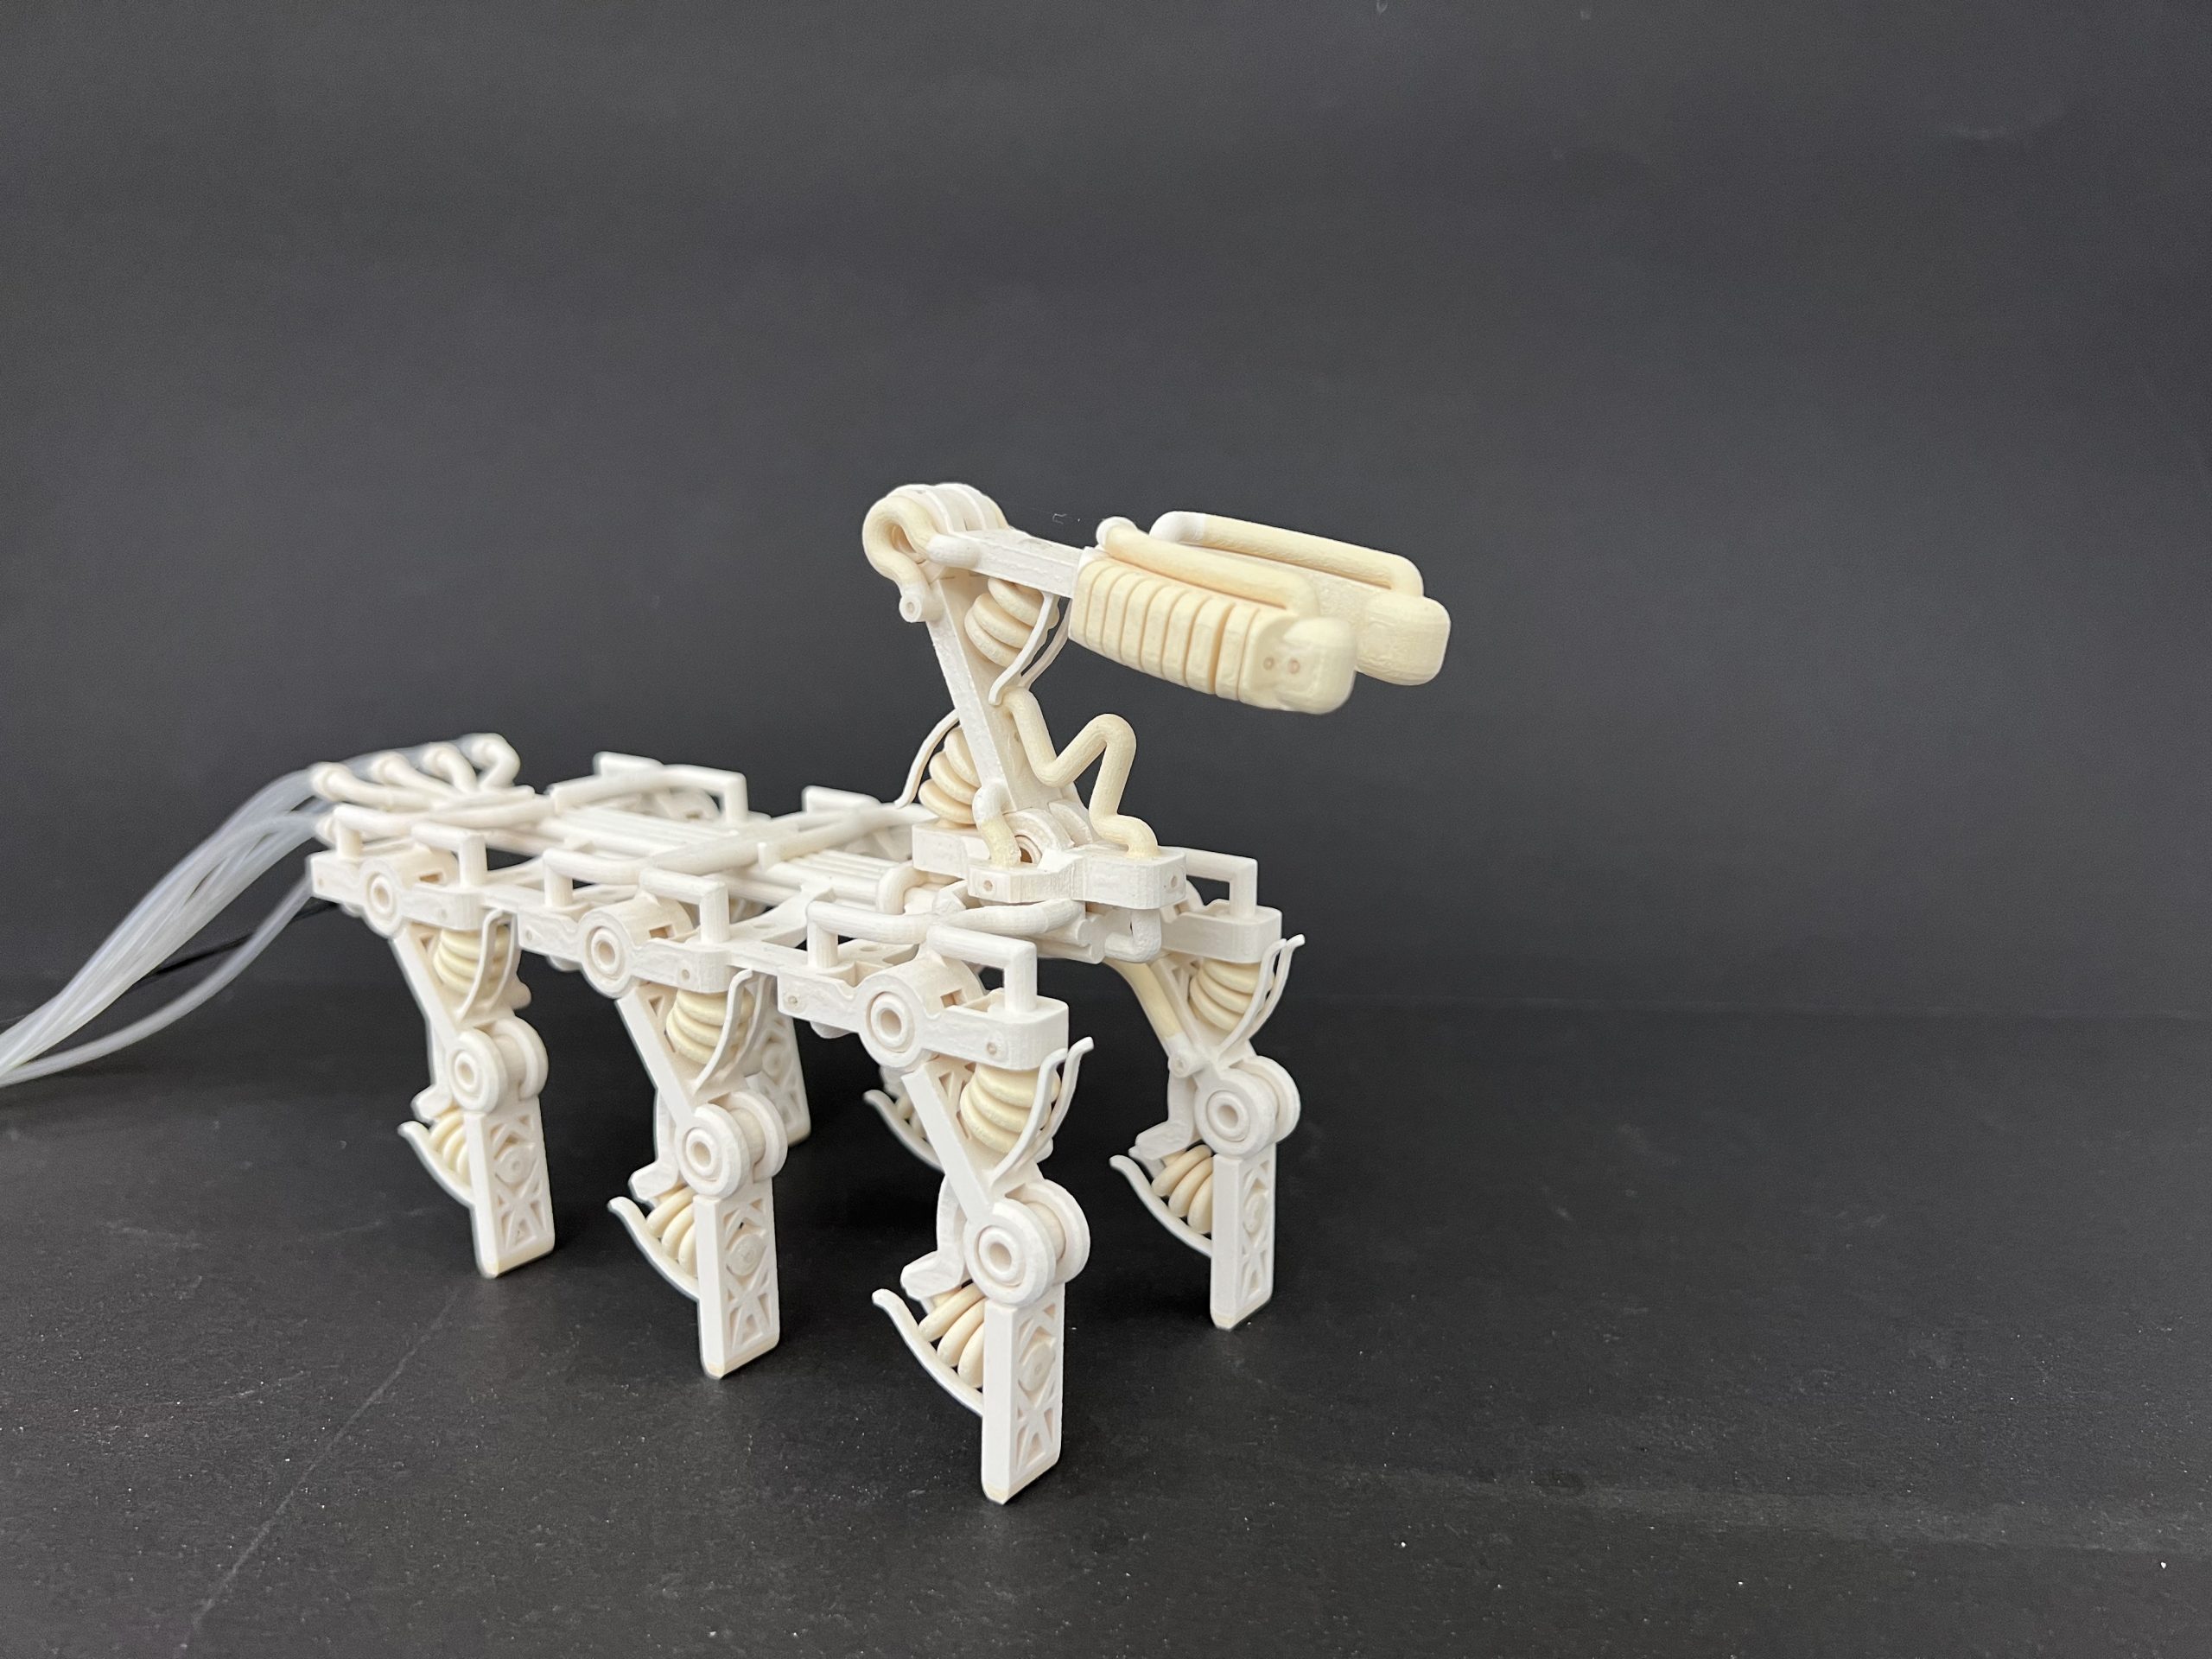 Researchers printed a robotic hand with bones, ligaments and tendons for the first time